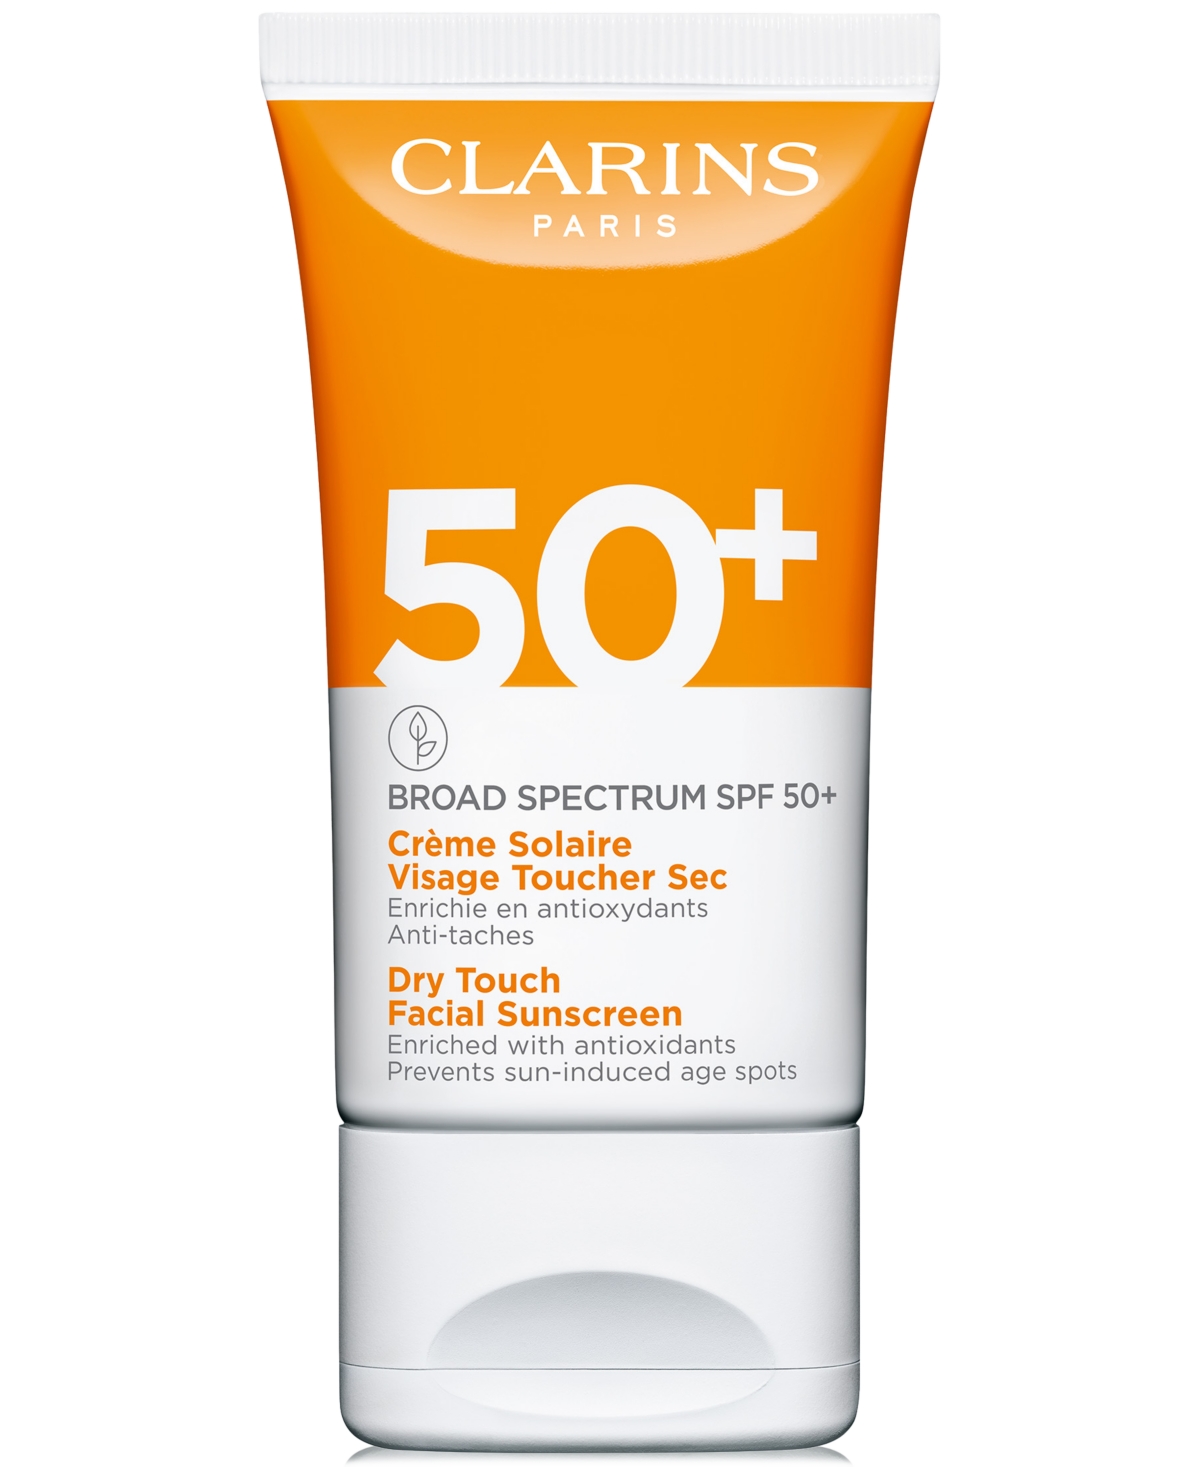 Dry Touch Facial Sunscreen Broad Spectrum Spf 50+, 1.7 oz.